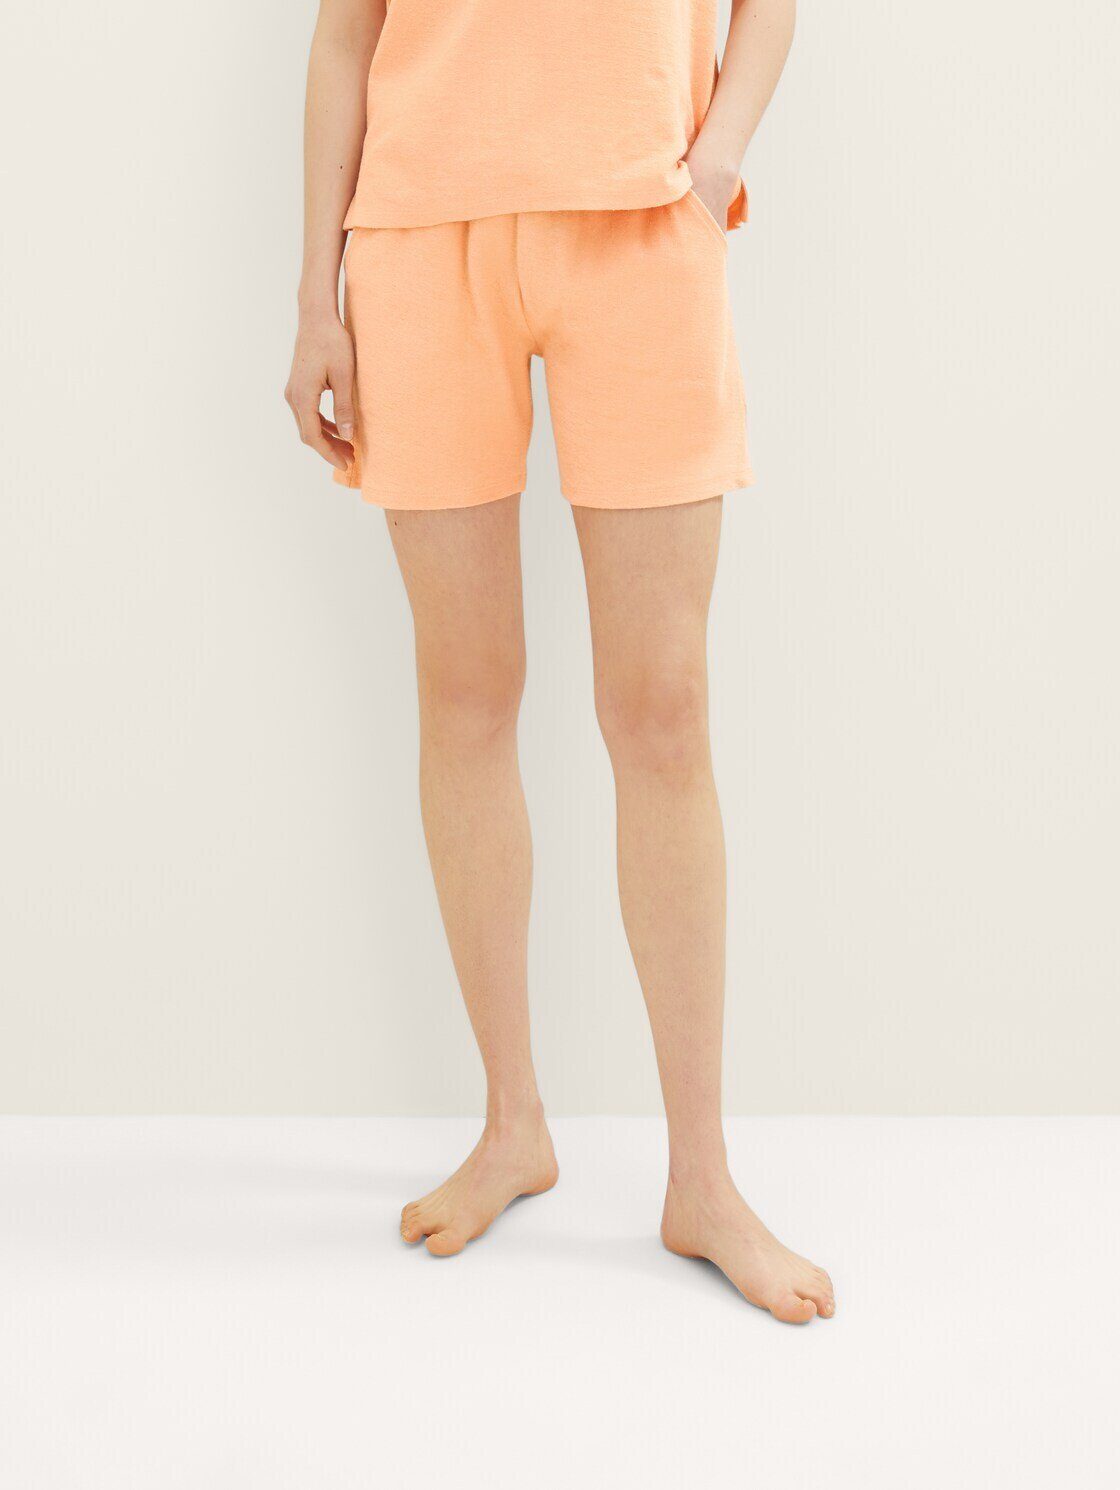 TOM TAILOR Schlafshorts Shorts Frottee